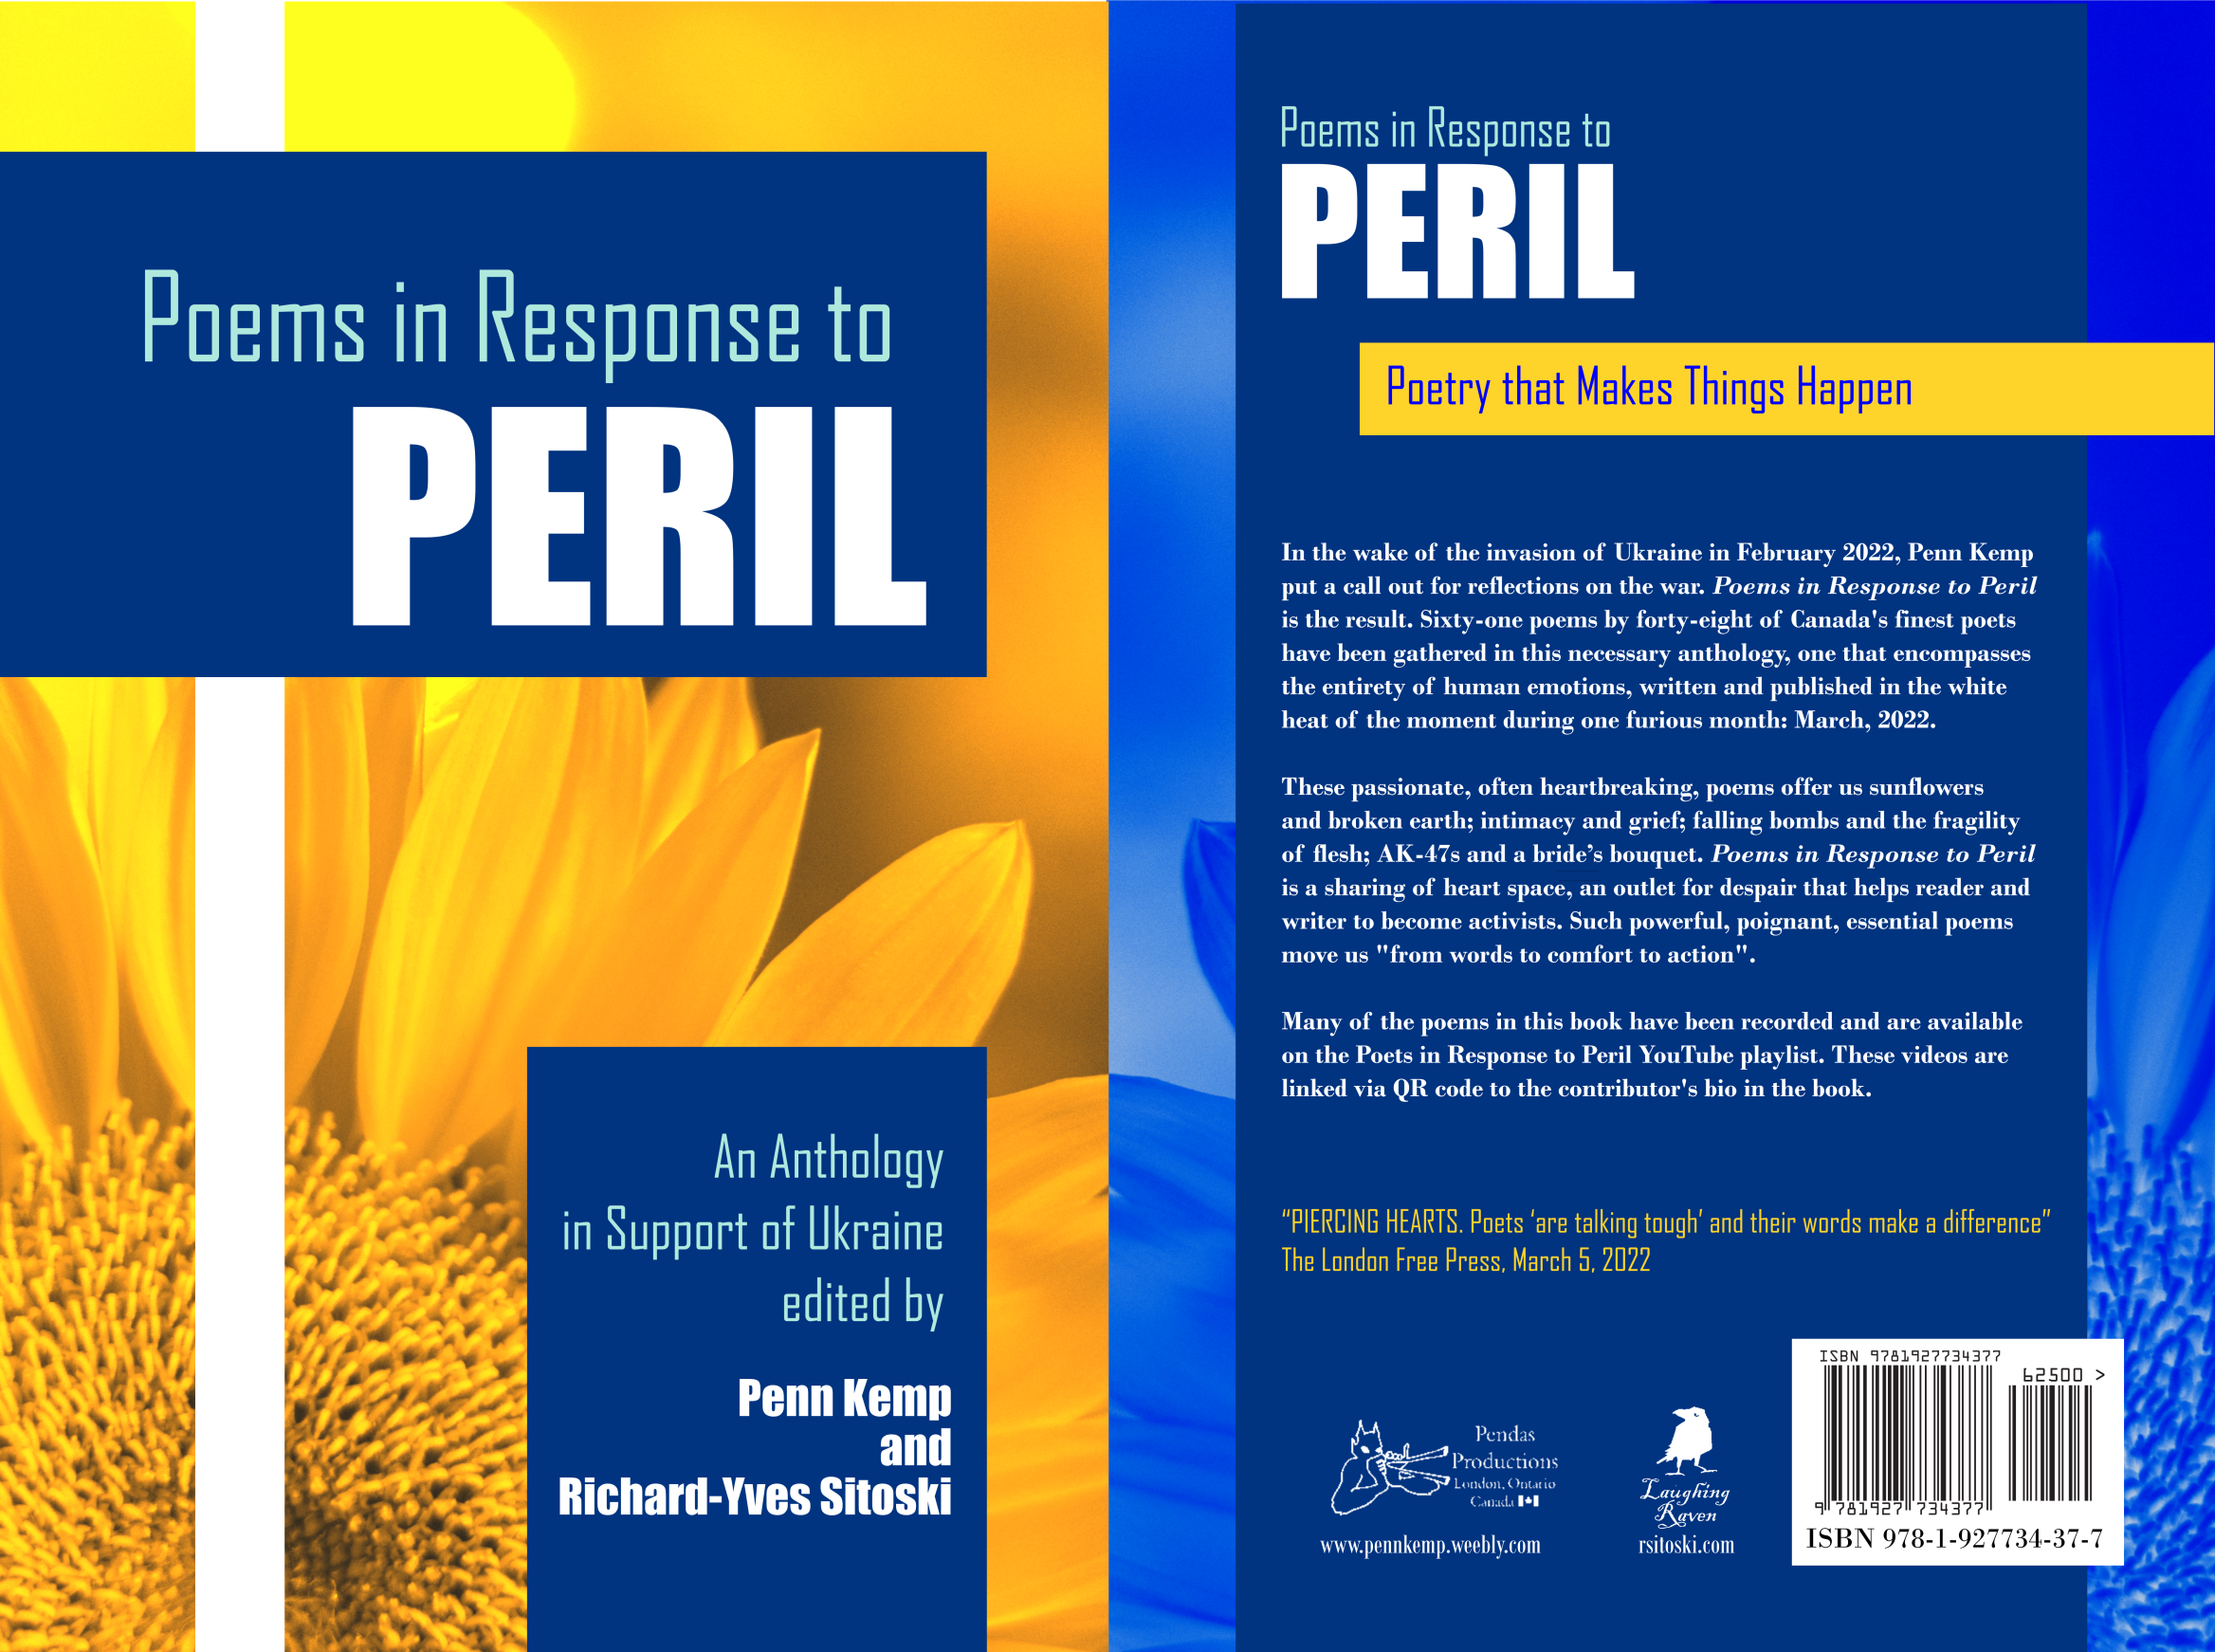 blue book cover with a large photo of a yellow sunflower in the forefront. Typography: "Poems in Repsonse to Peril"